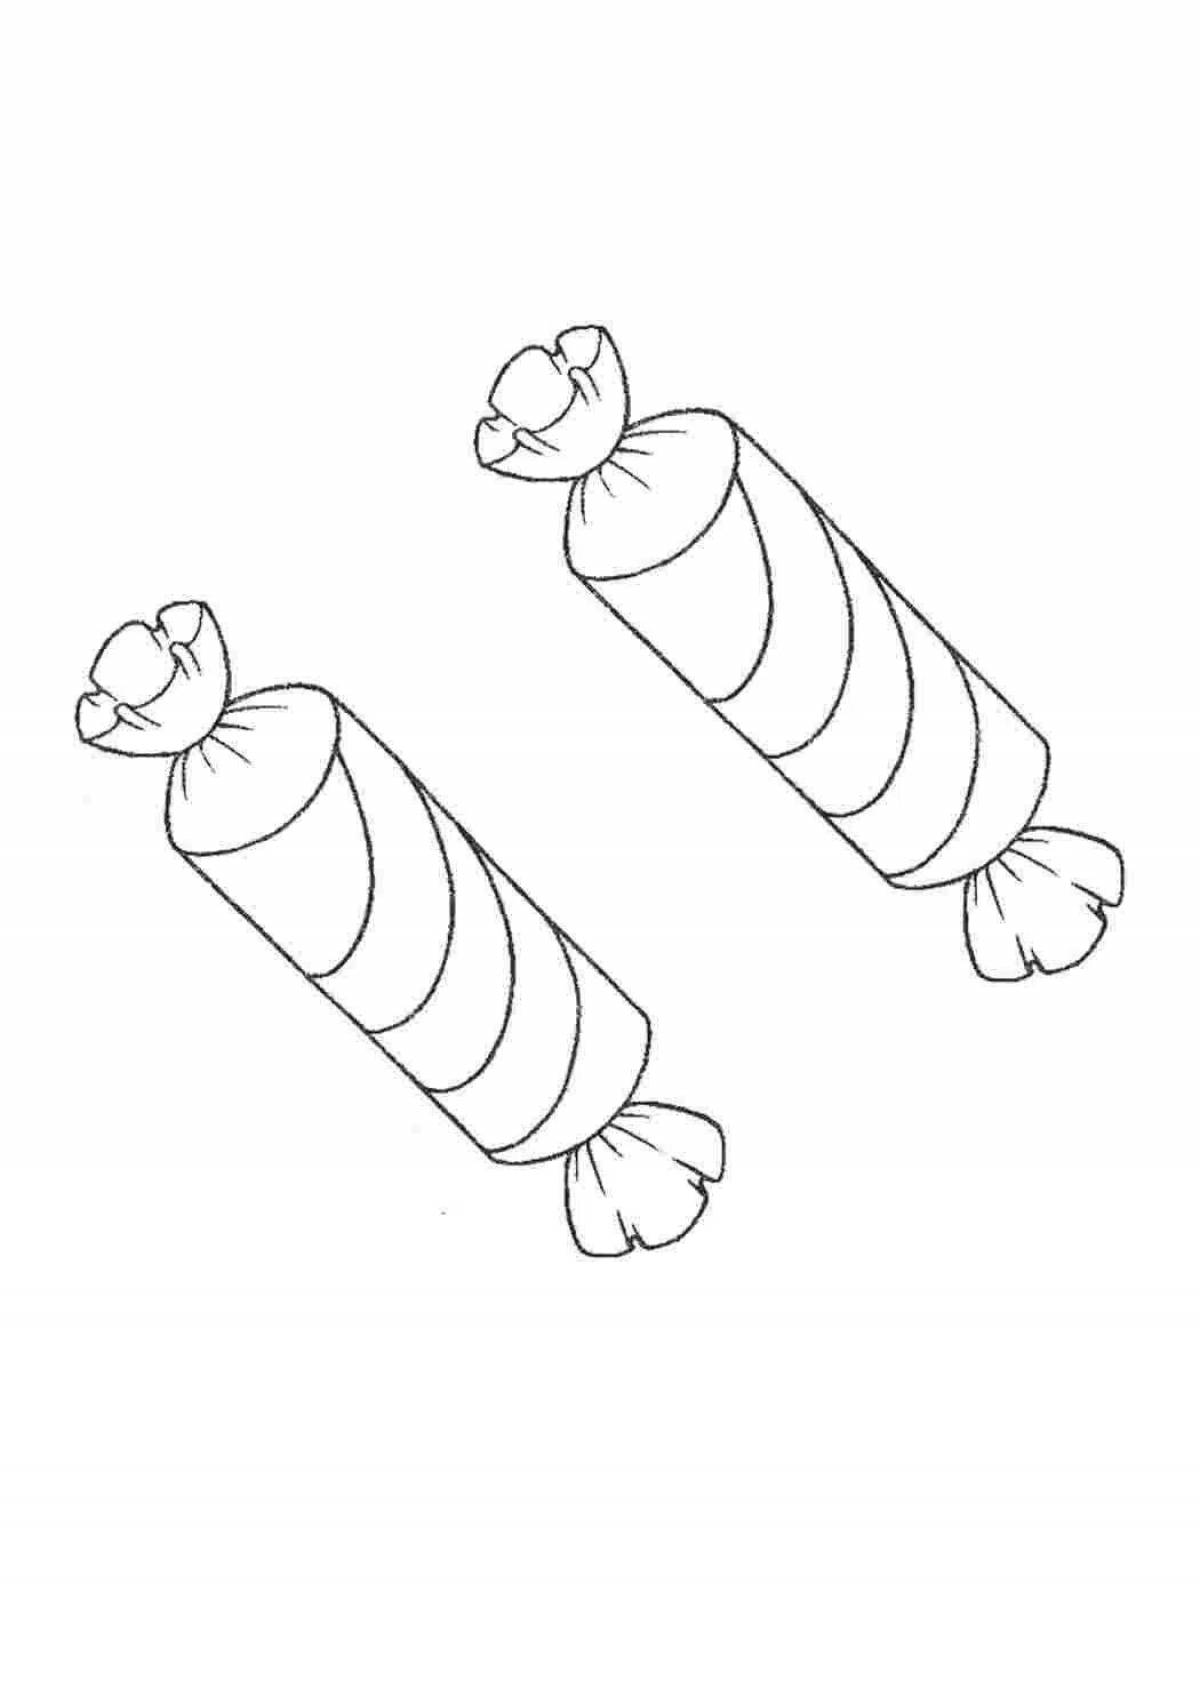 Coloring page fancy candy wrapper